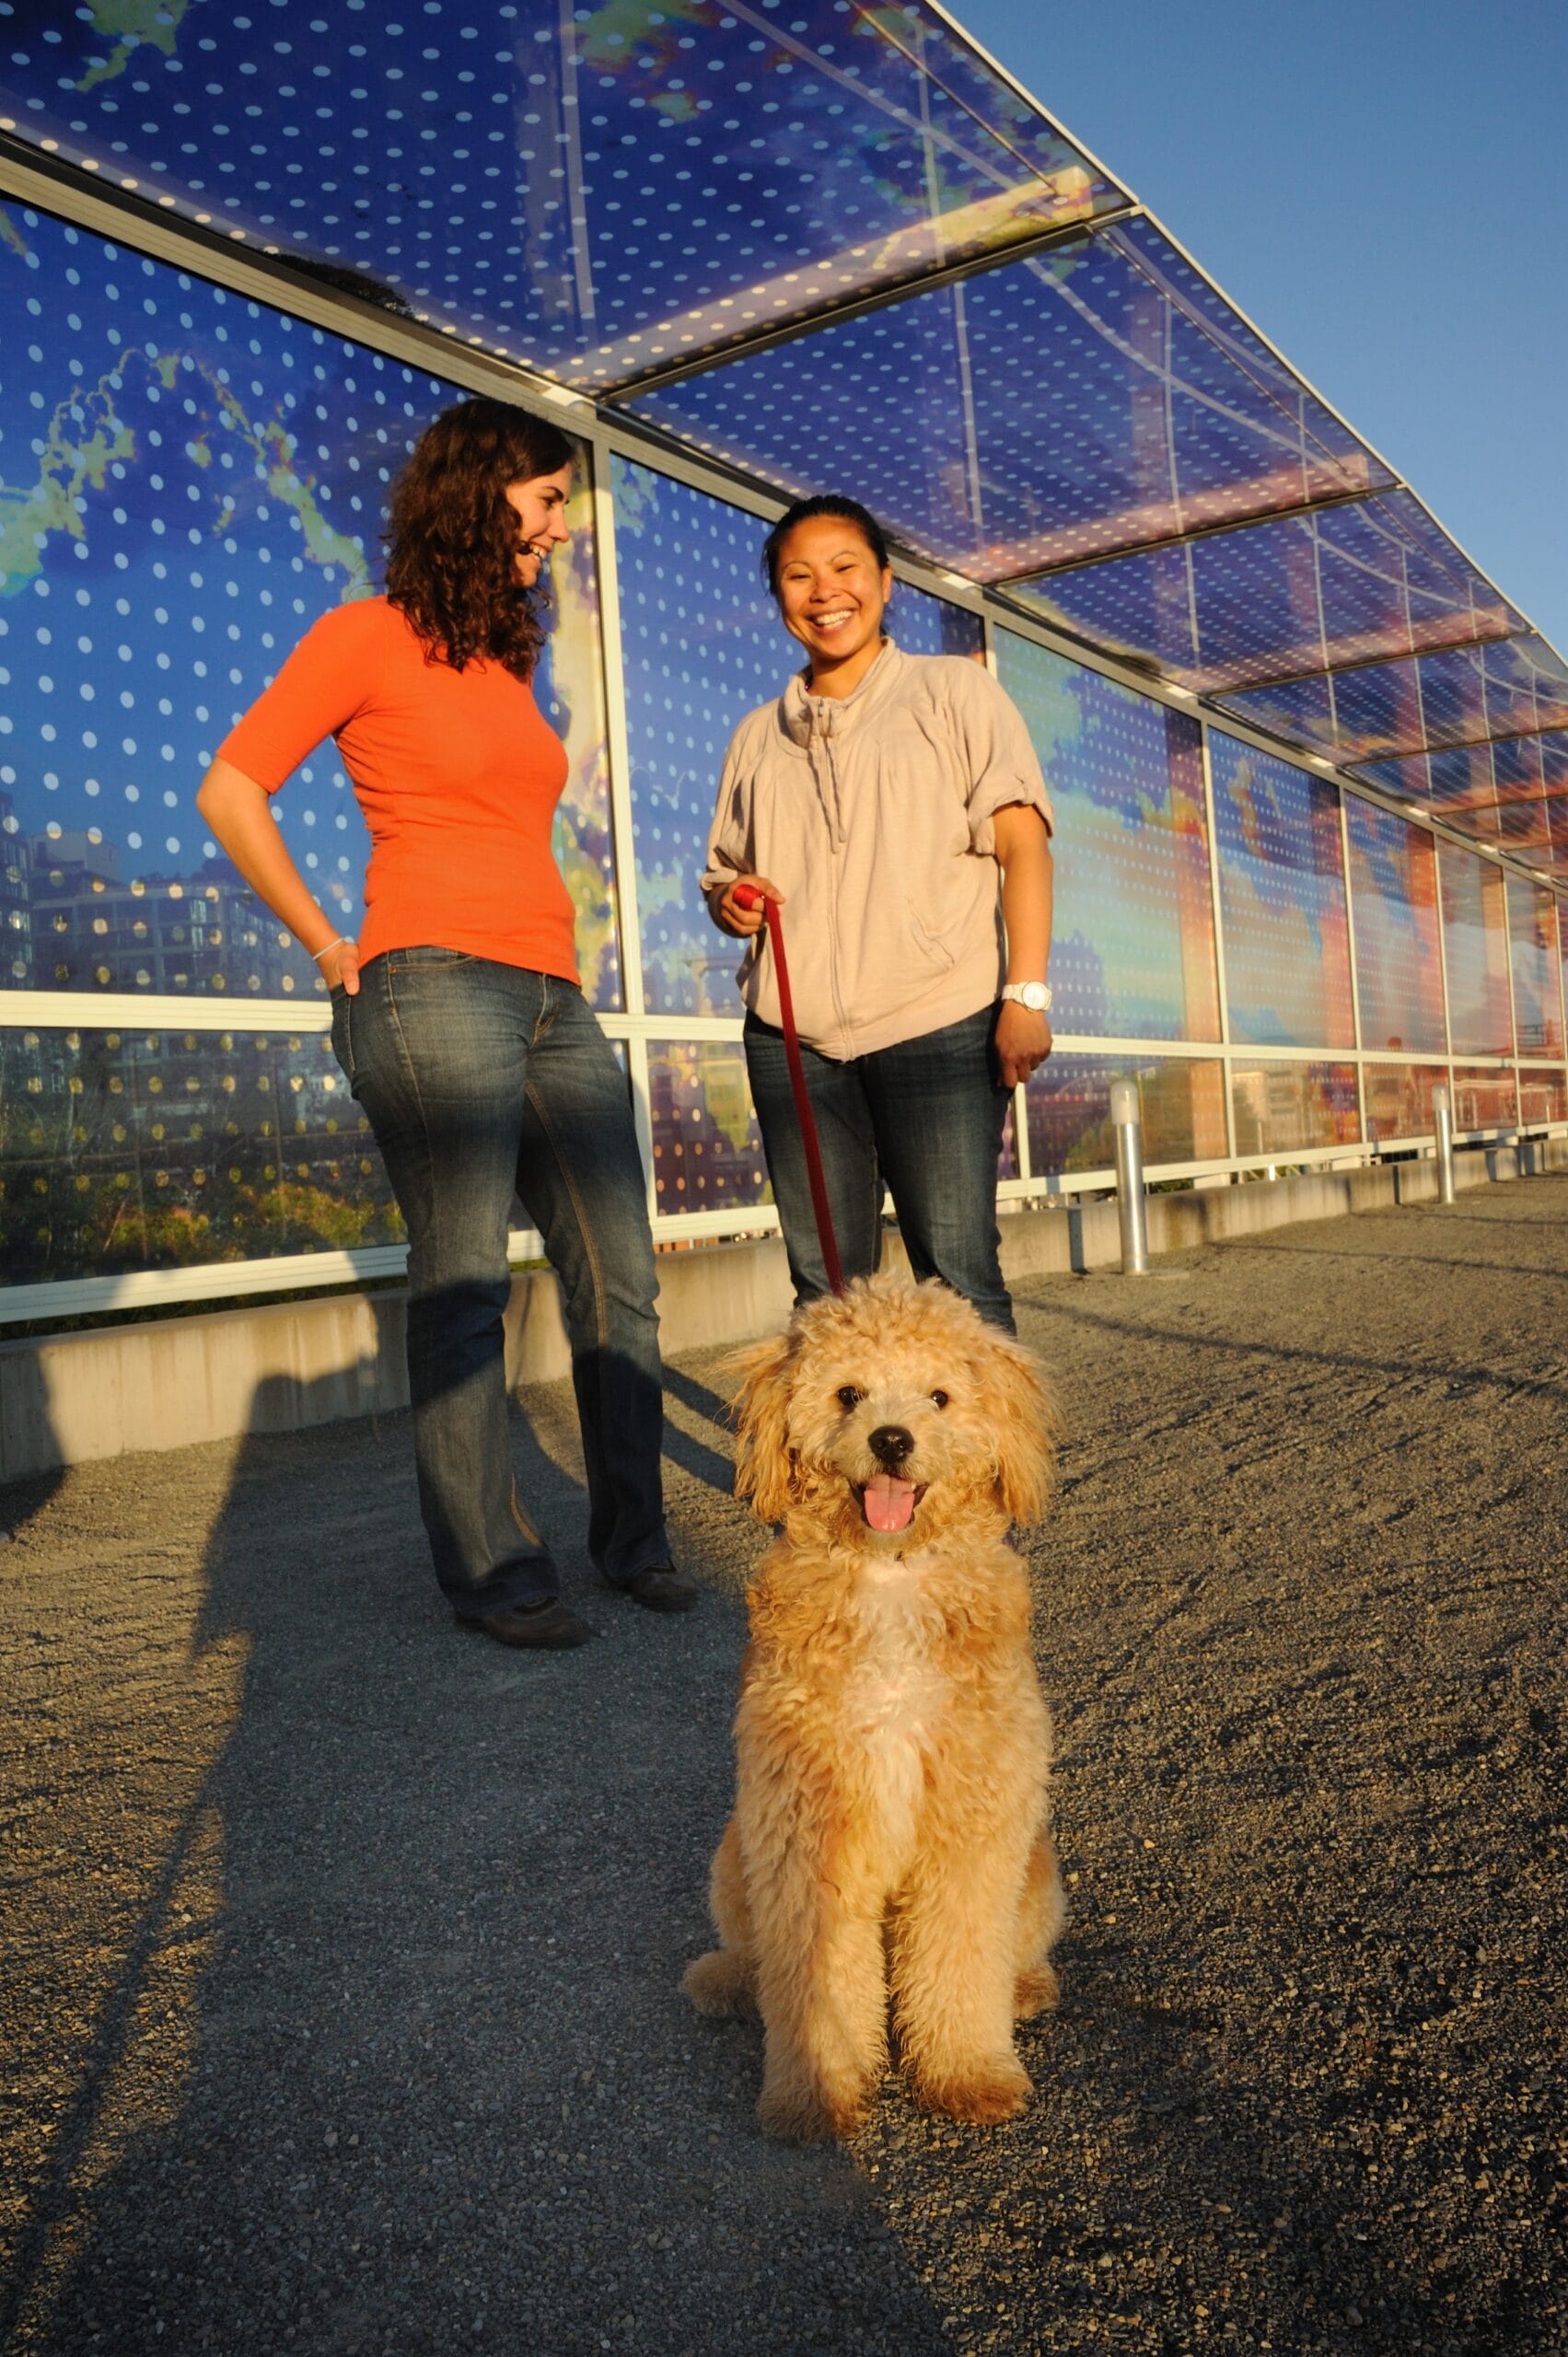 Two people and a dog standing in front of a solar paneled building.